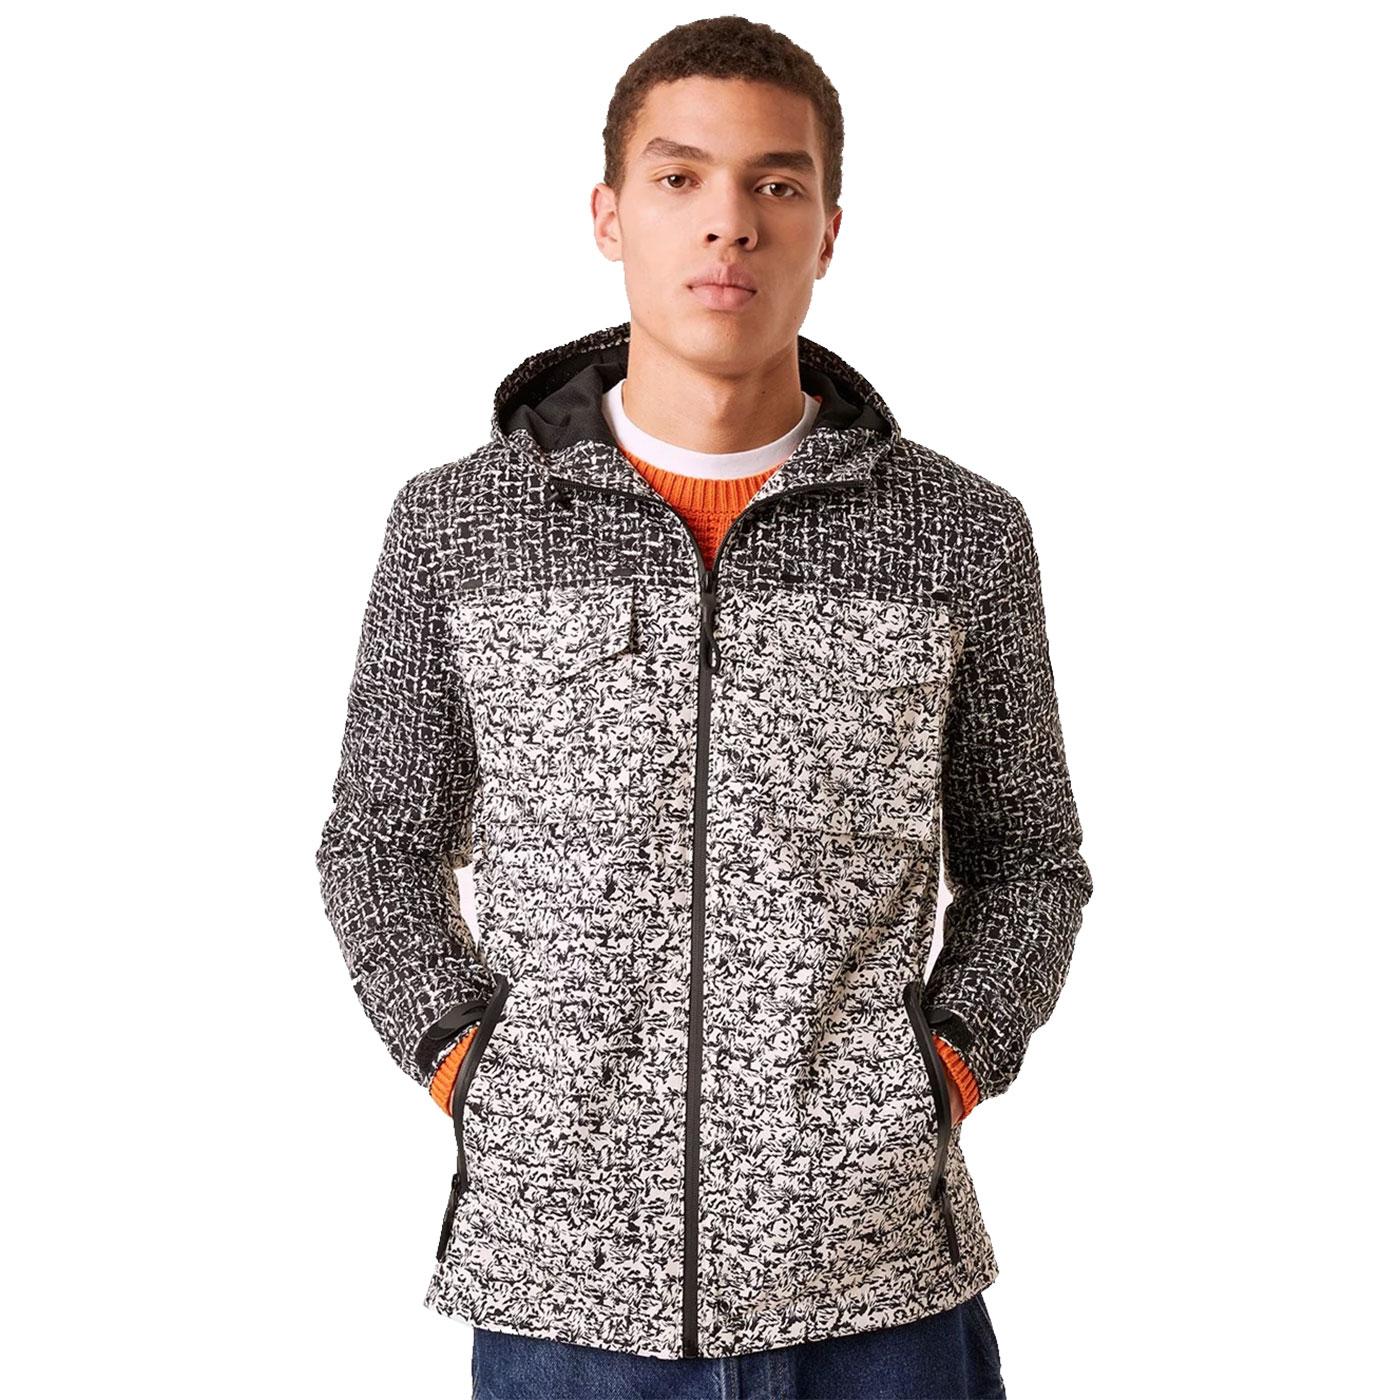 FRENCH CONNECTION Men's Printed Technical Jacket